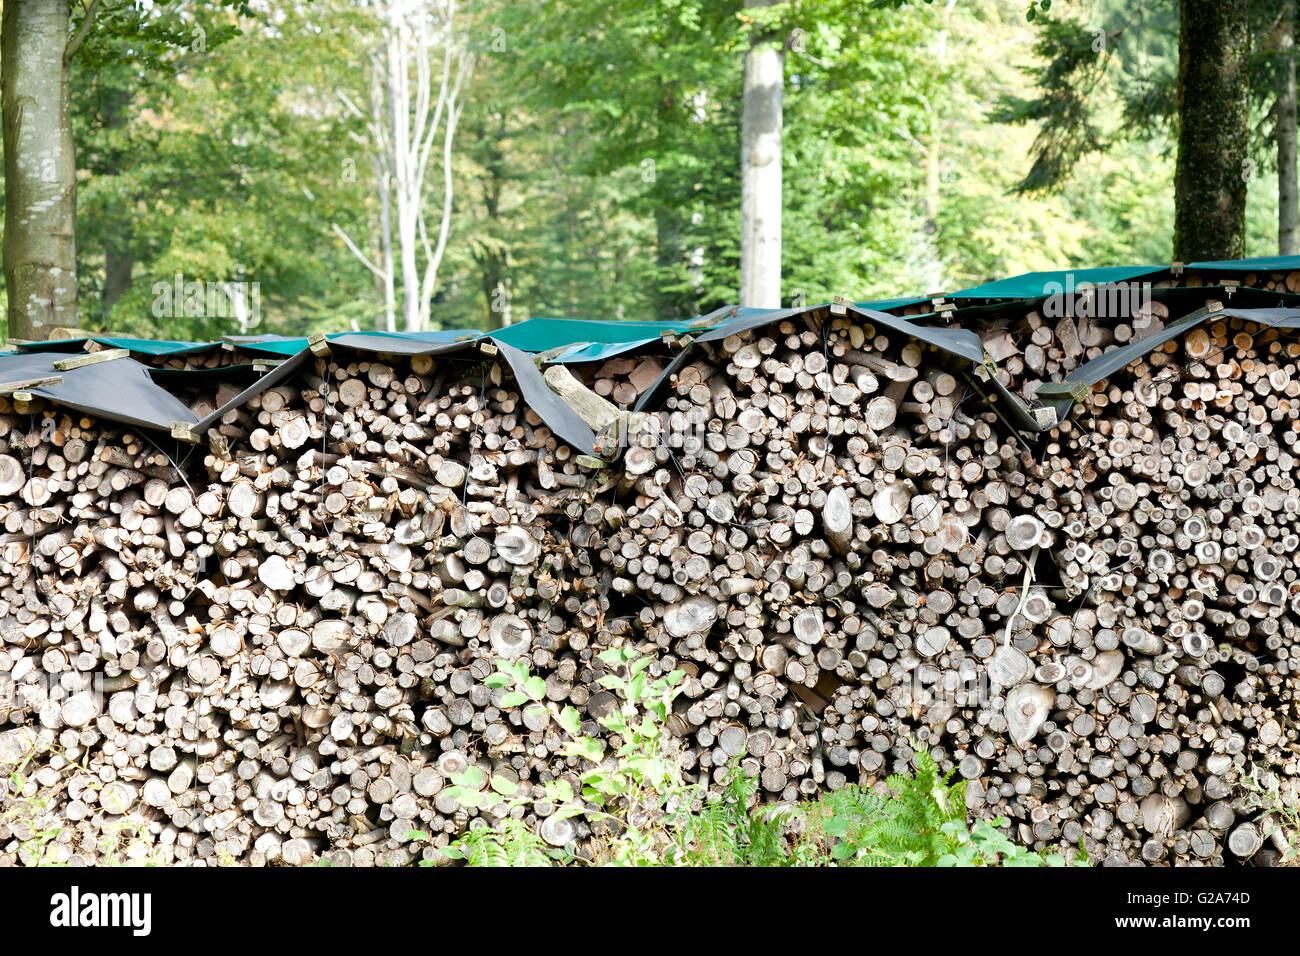 Woodland management in the Black Forest, processed logs stacked in the woodland by people using their local woodlands sustainably for their own uses Stock Photo